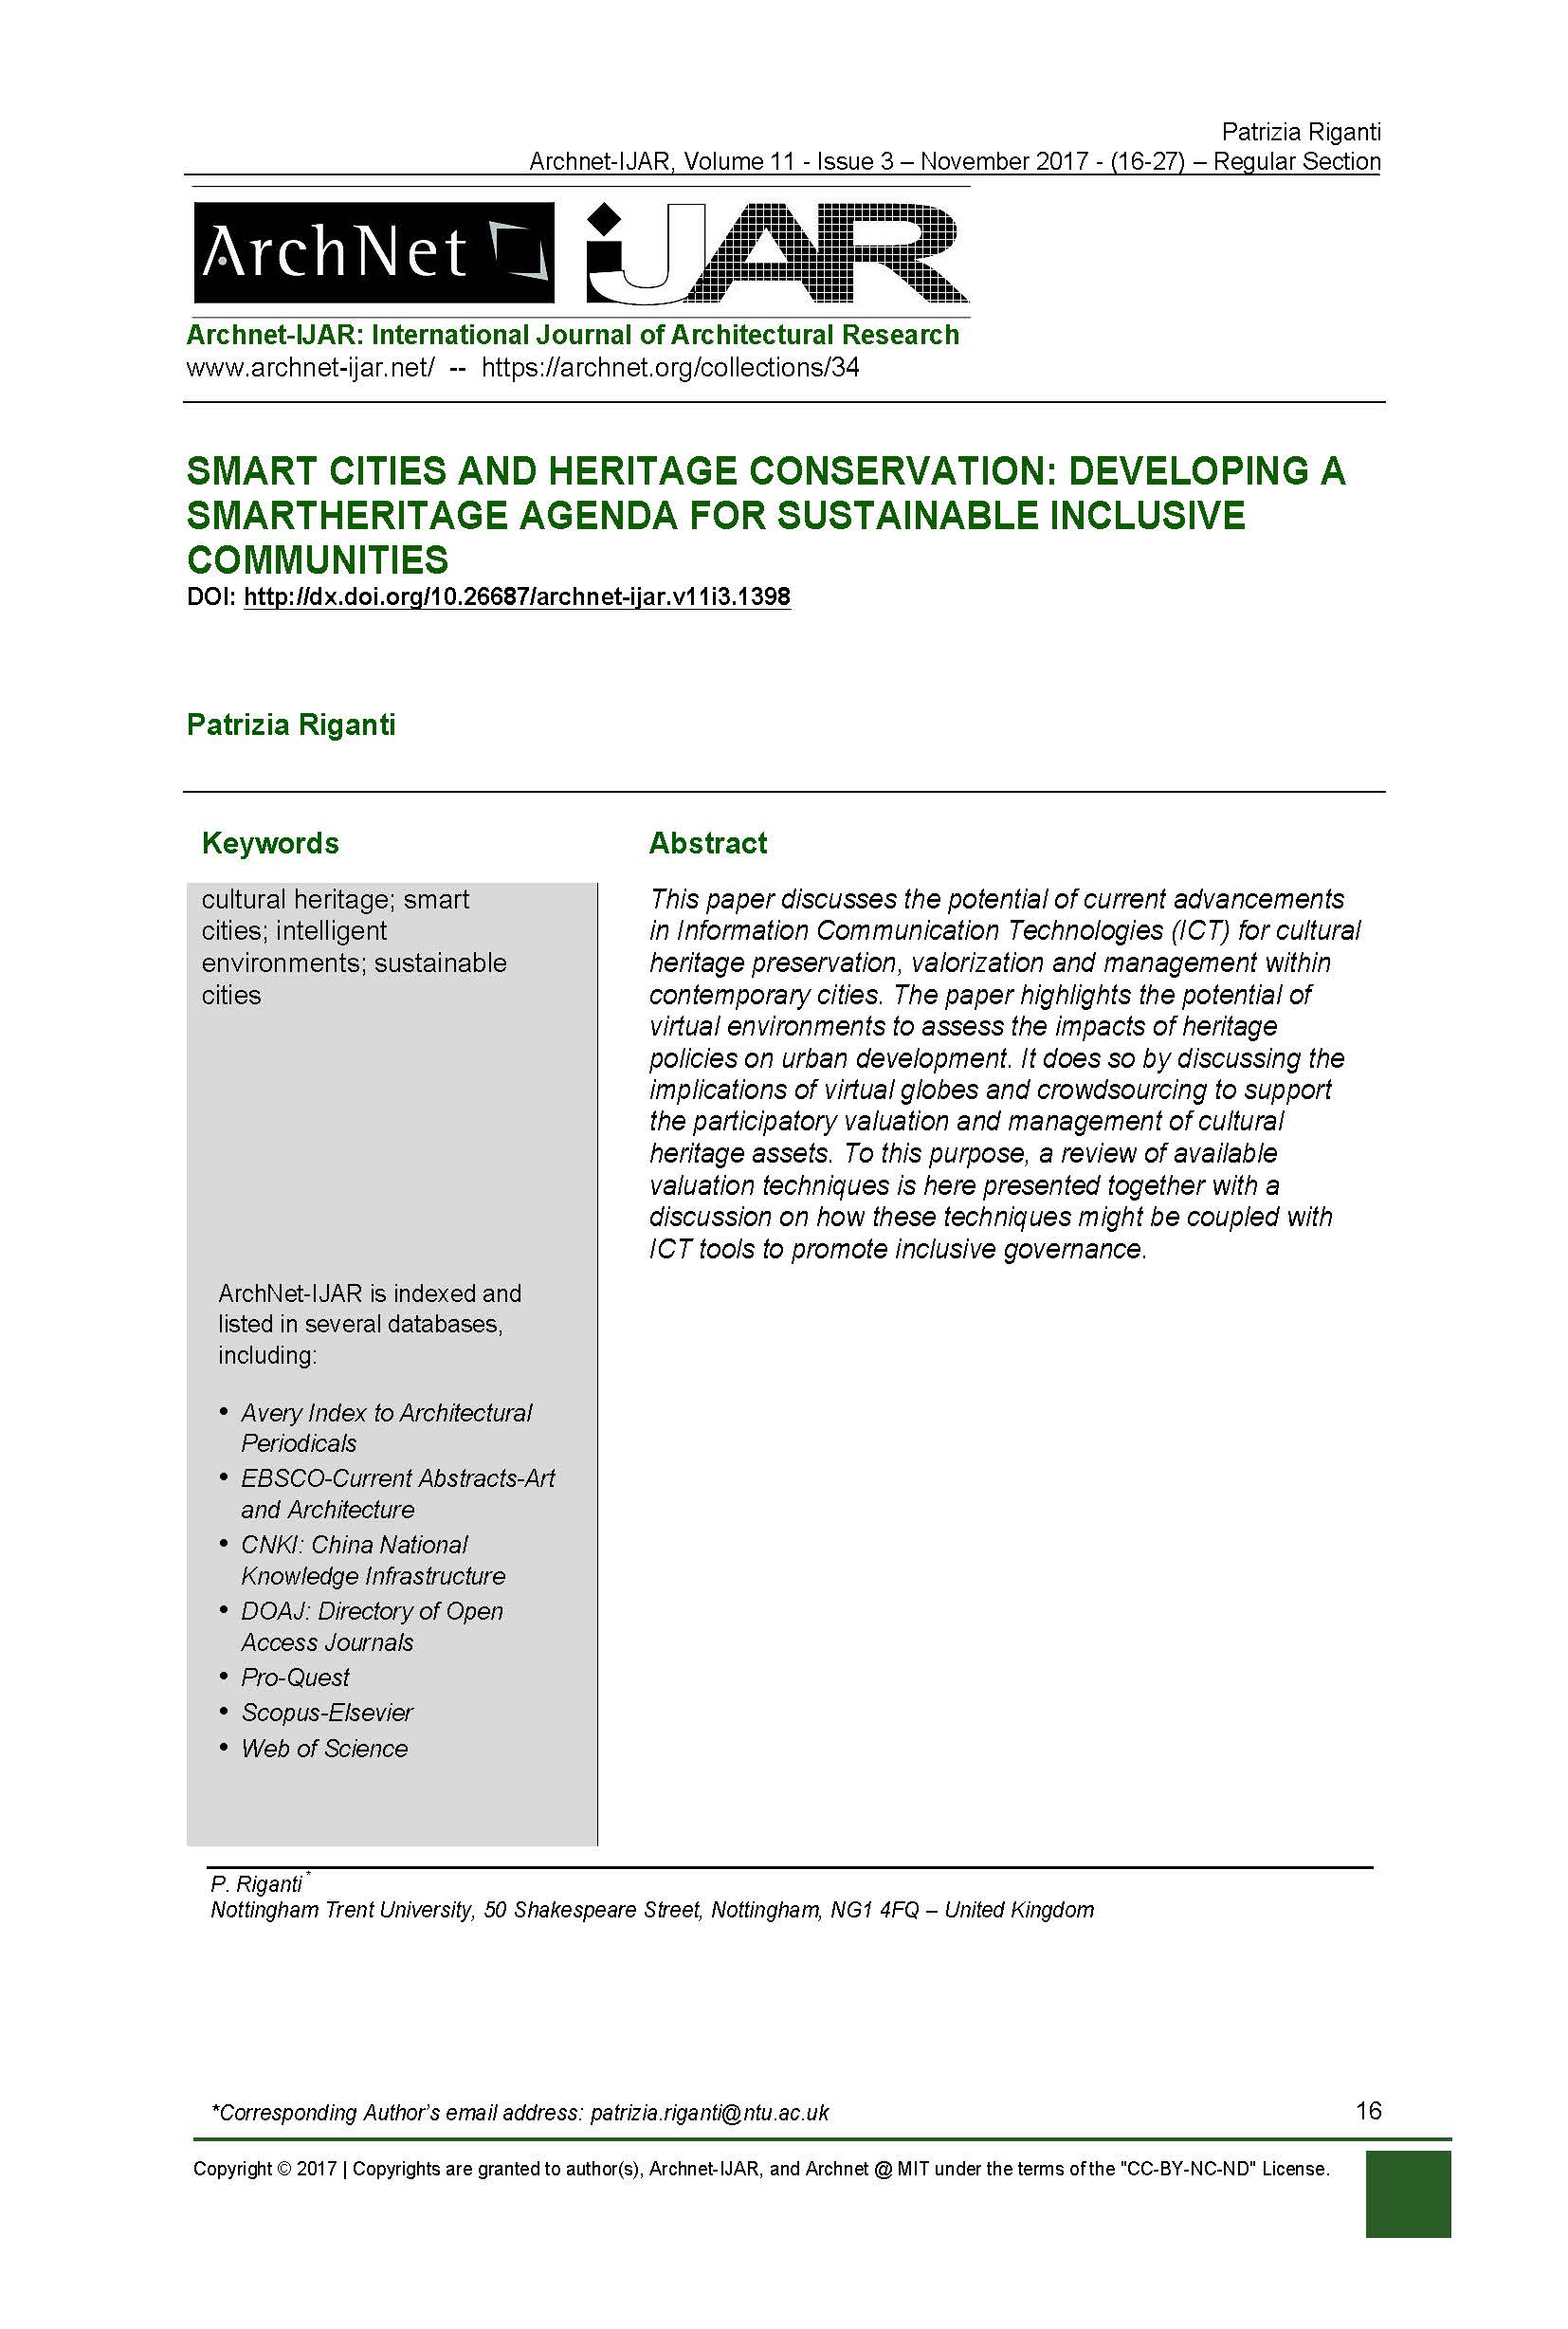 Smart Cities and Heritage Conservation: Developing a Smartheritage Agenda for Sustainable Inclusive Communities